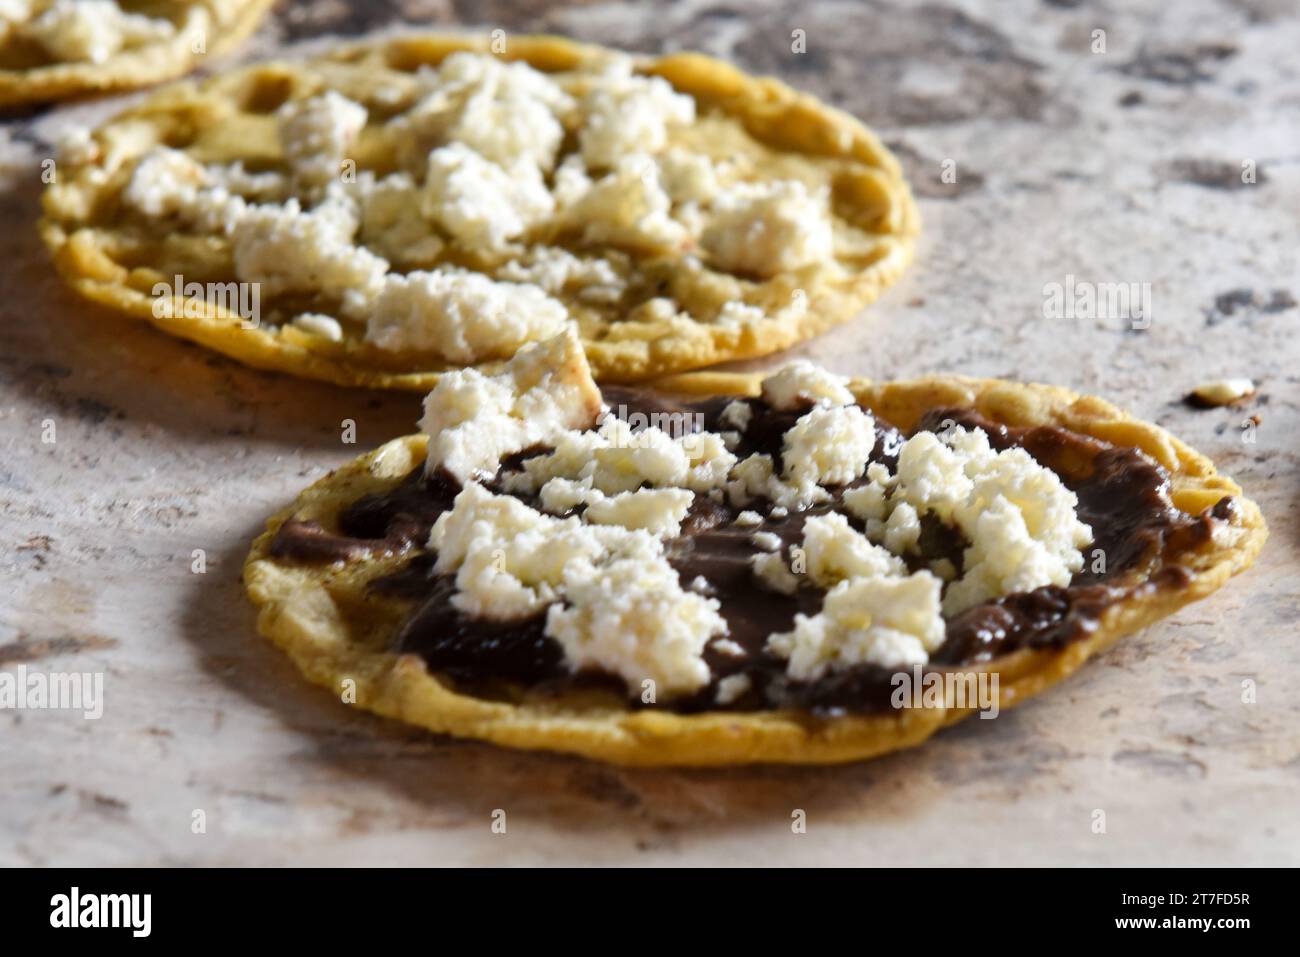 Chalupas with beans and cheese, Oaxaca Mexico Stock Photo